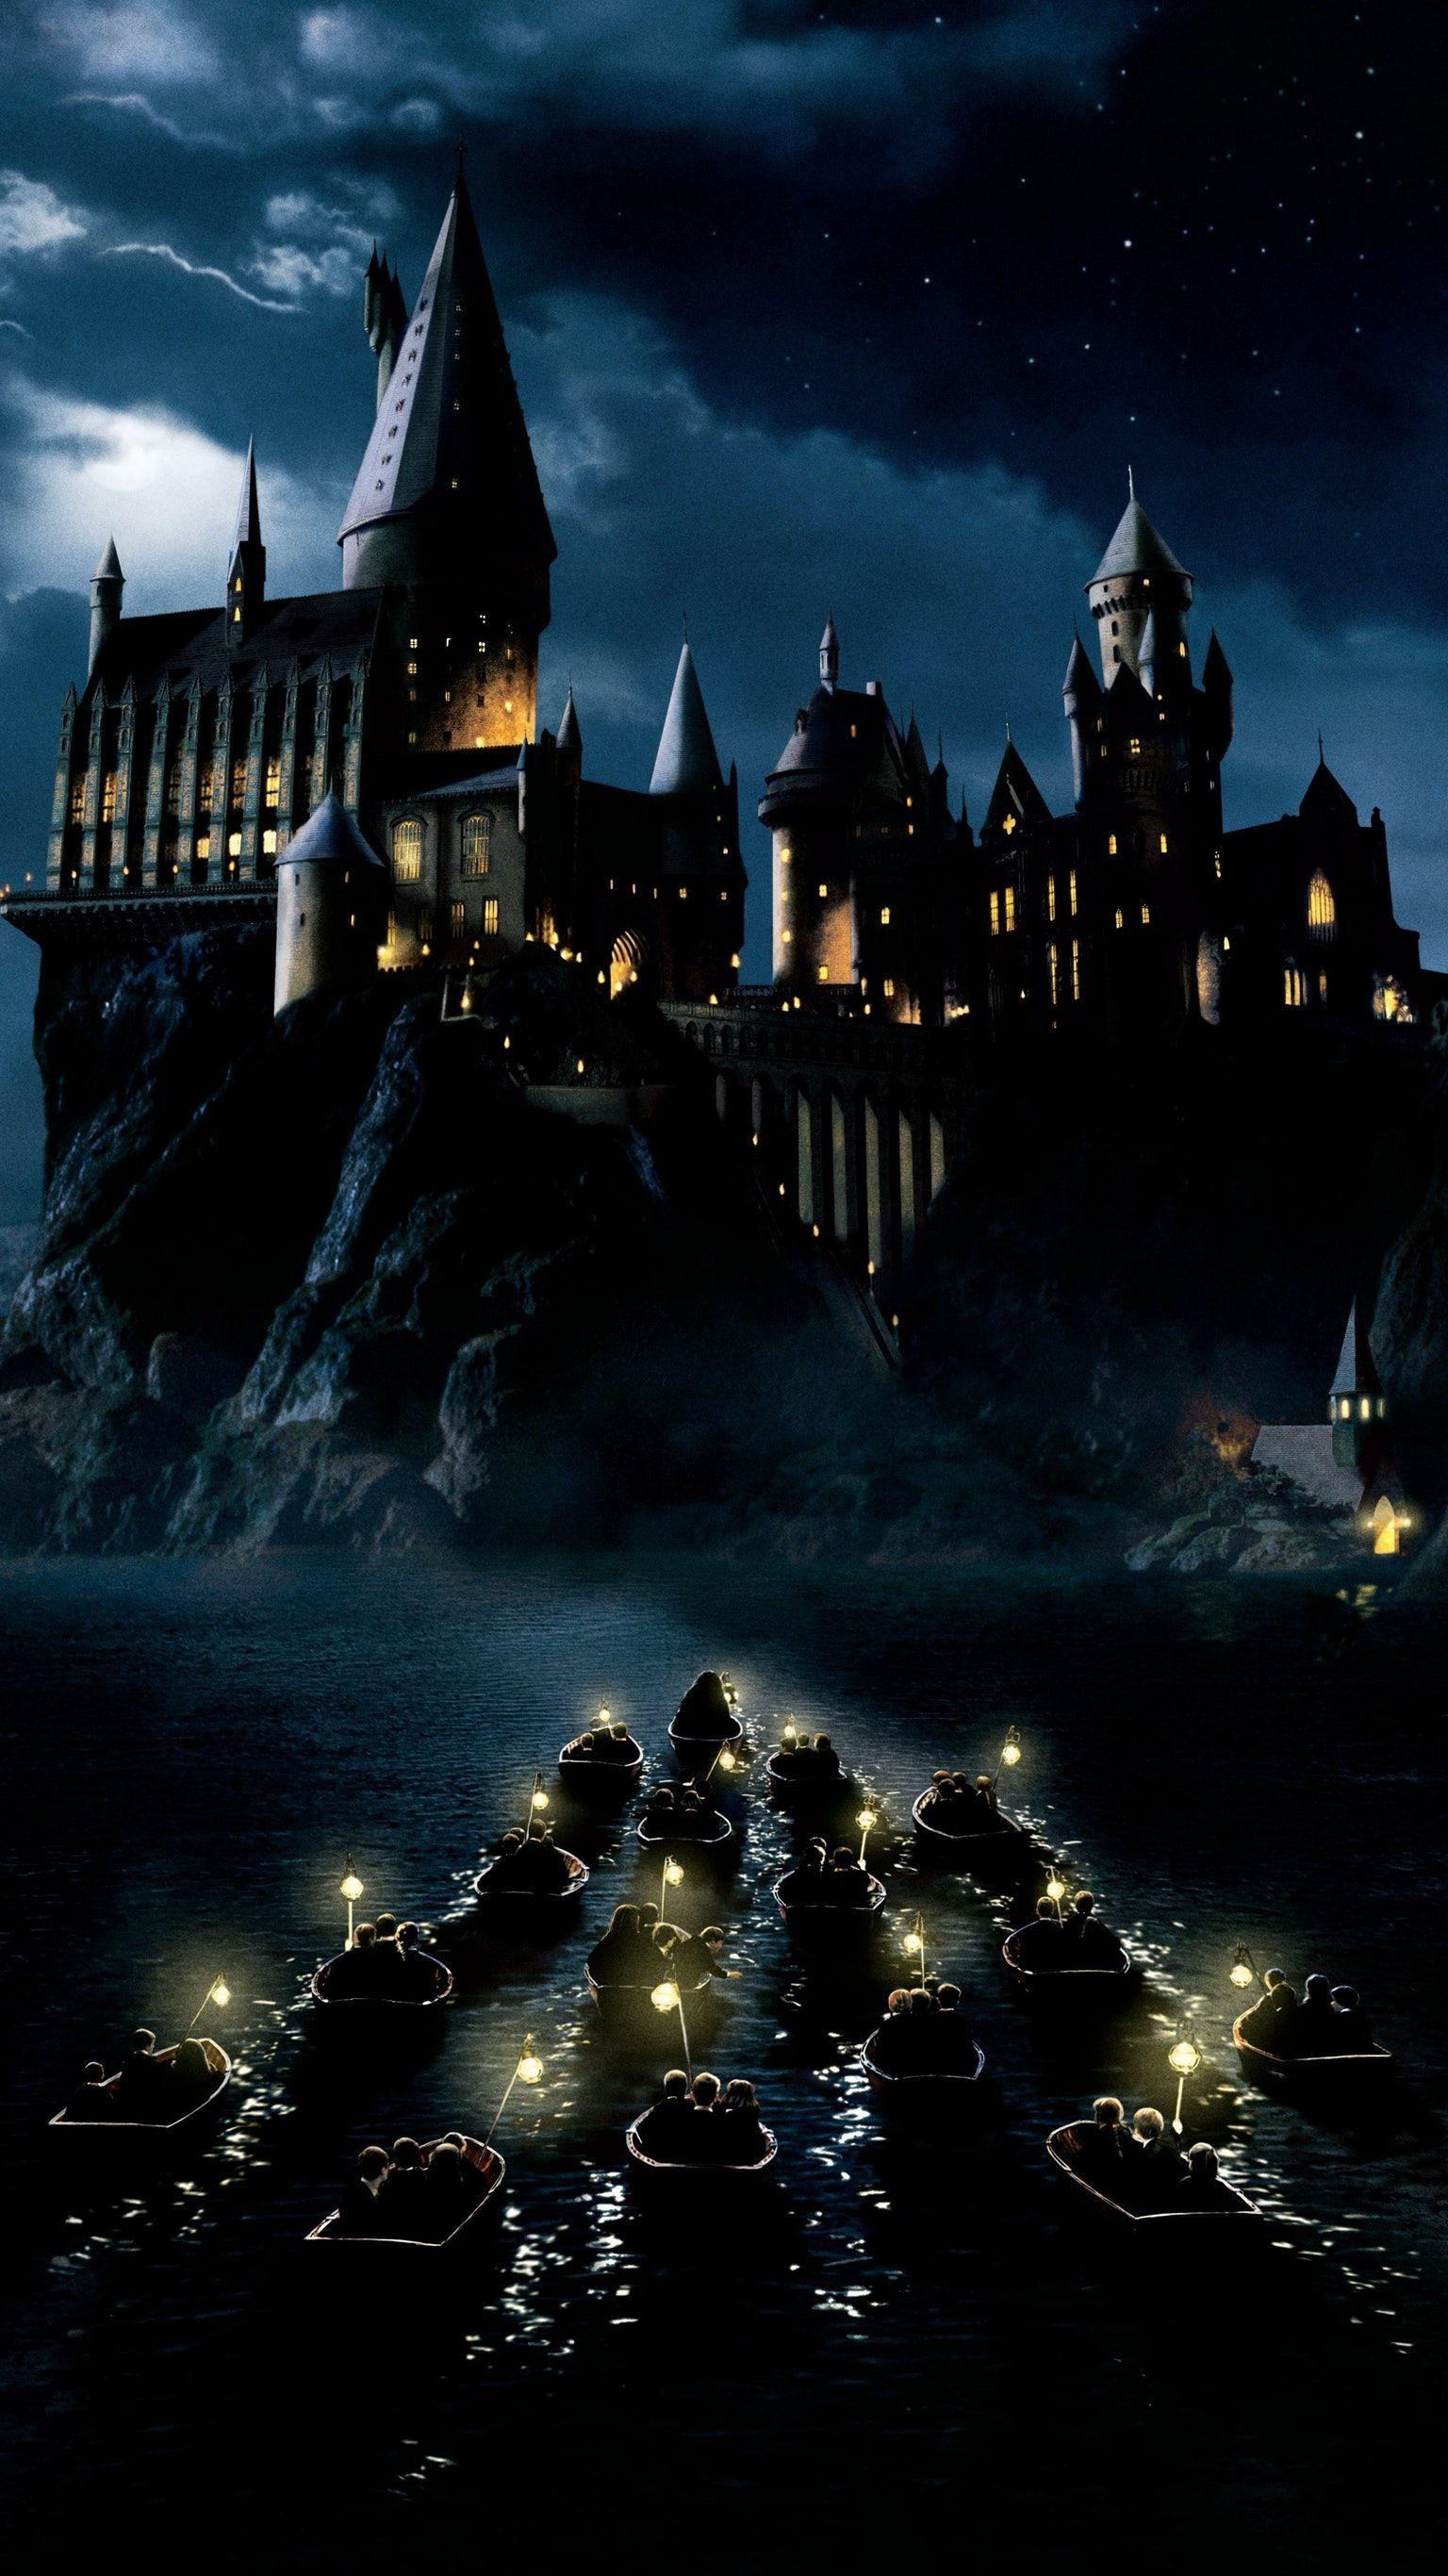 A castle with boats and lights on the water - Harry Potter